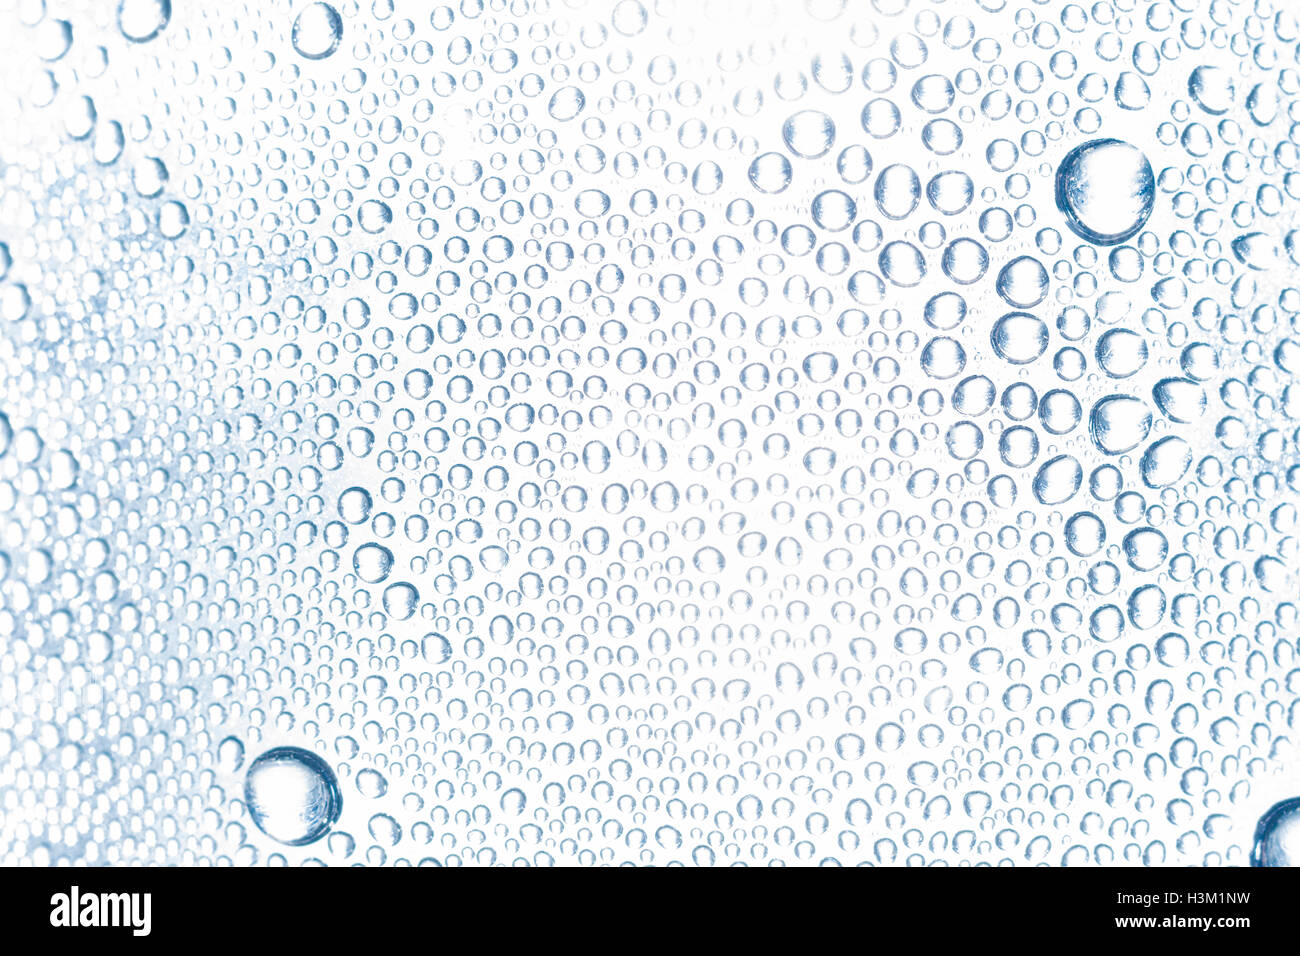 Abstract image of beads of water condensation on the inside of a PTFE bottle. Image exposure pushed to give blown-out look. Water Day concept. Stock Photo